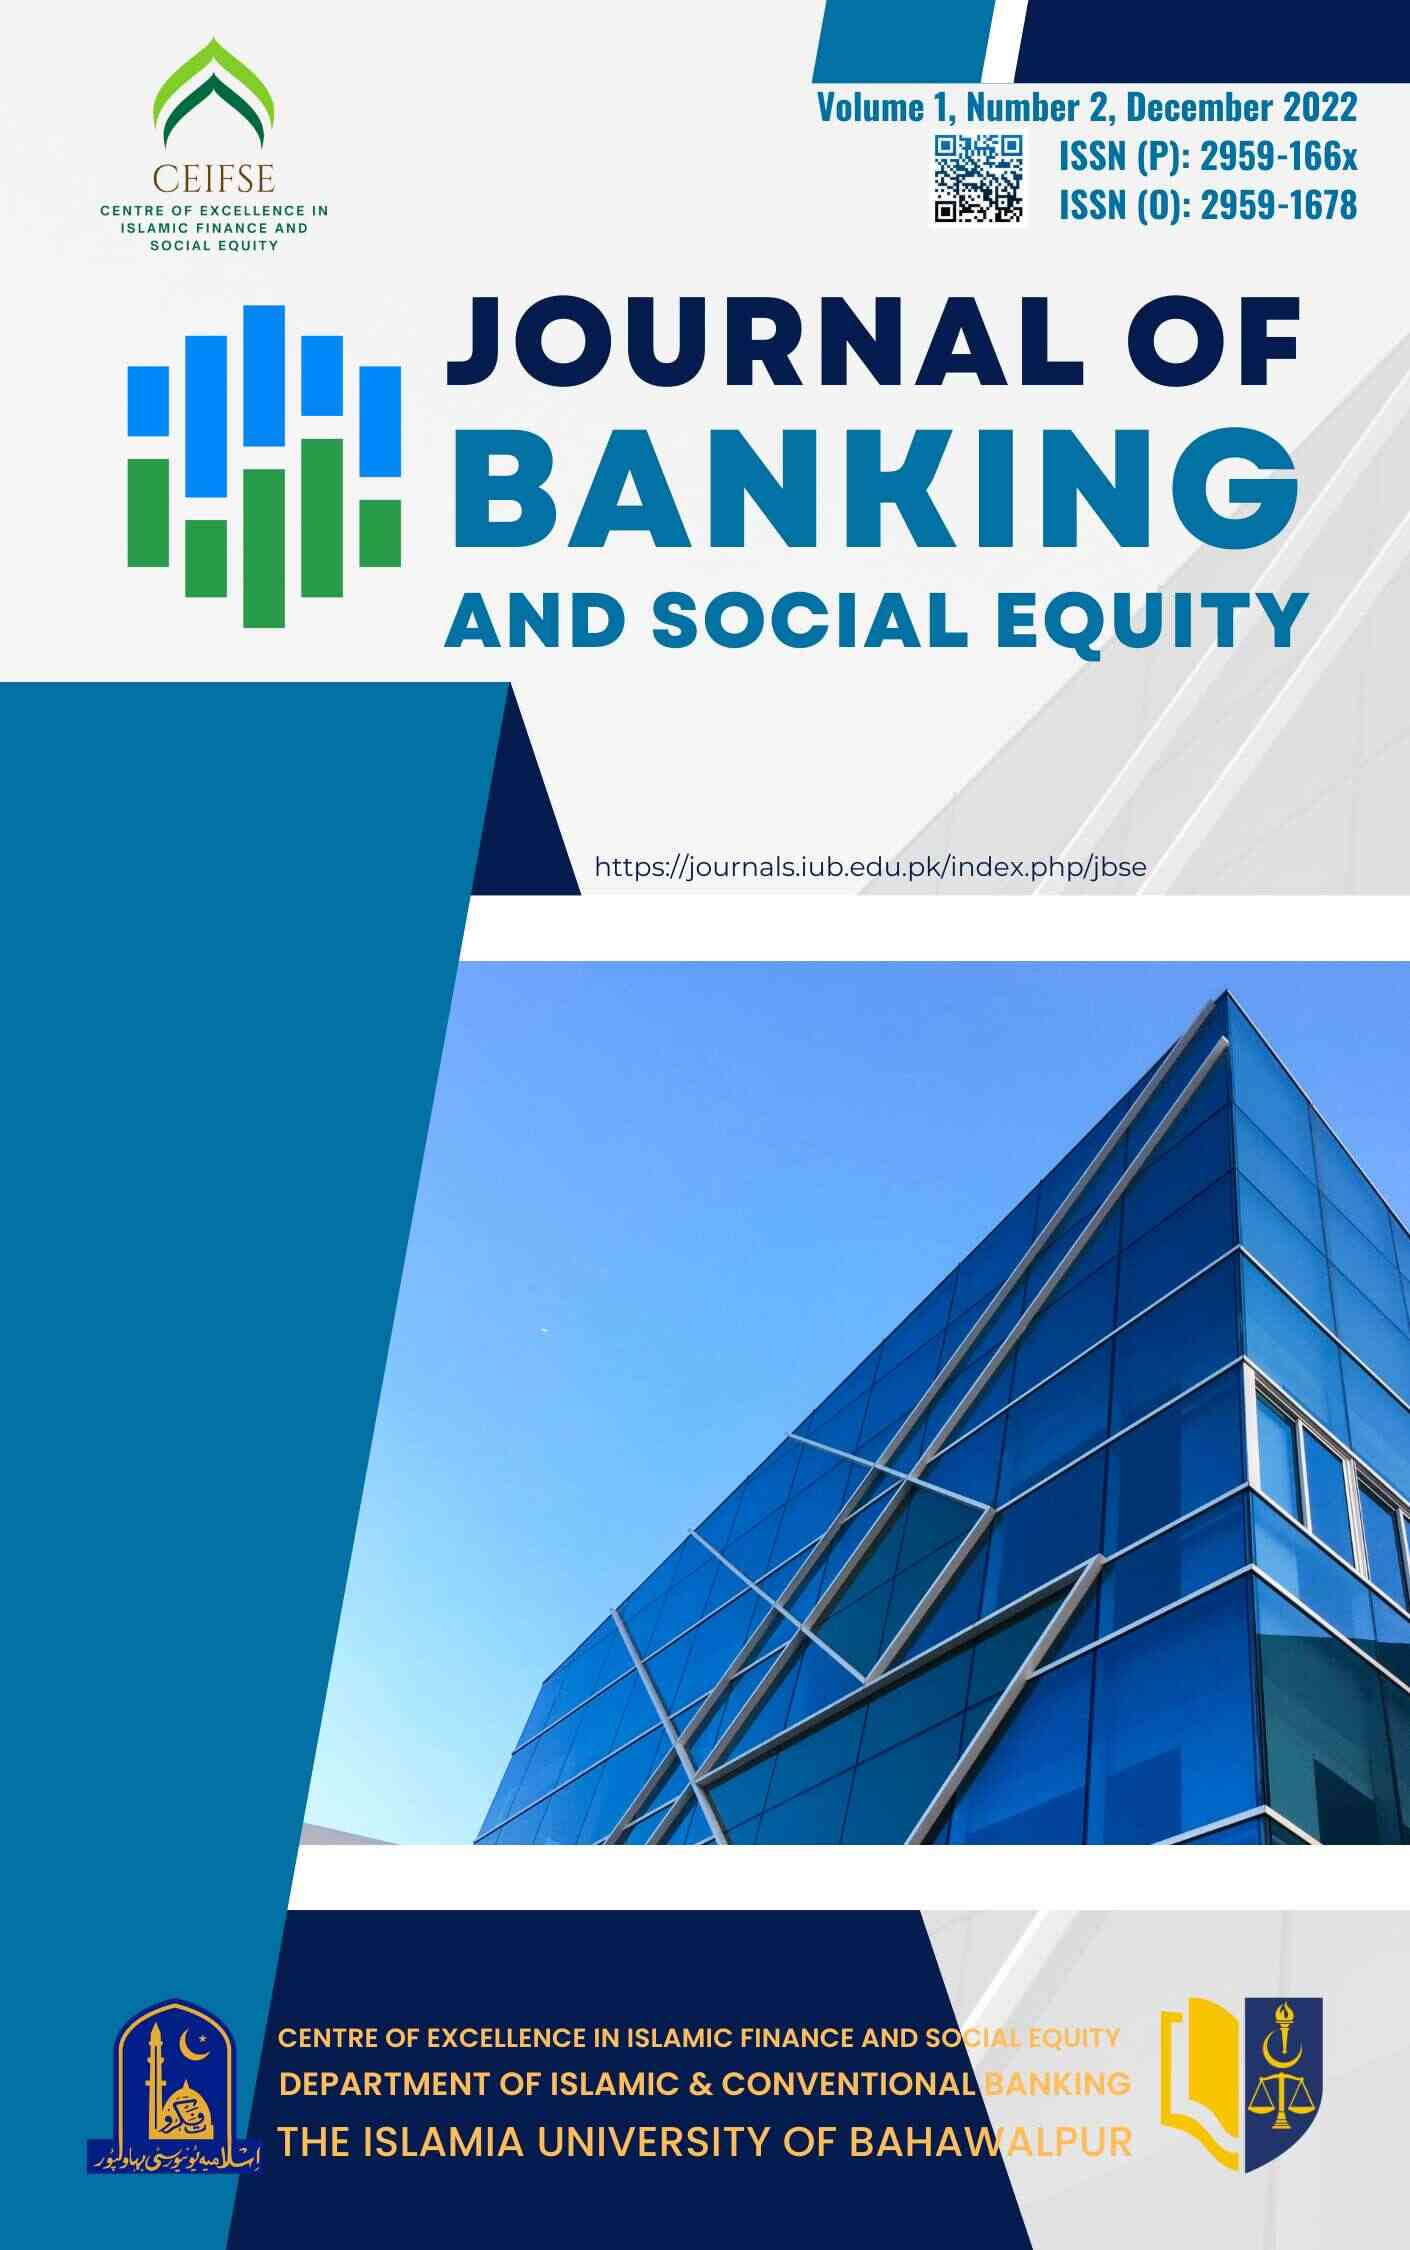 Journal of Banking and Social Equity (JBSE)